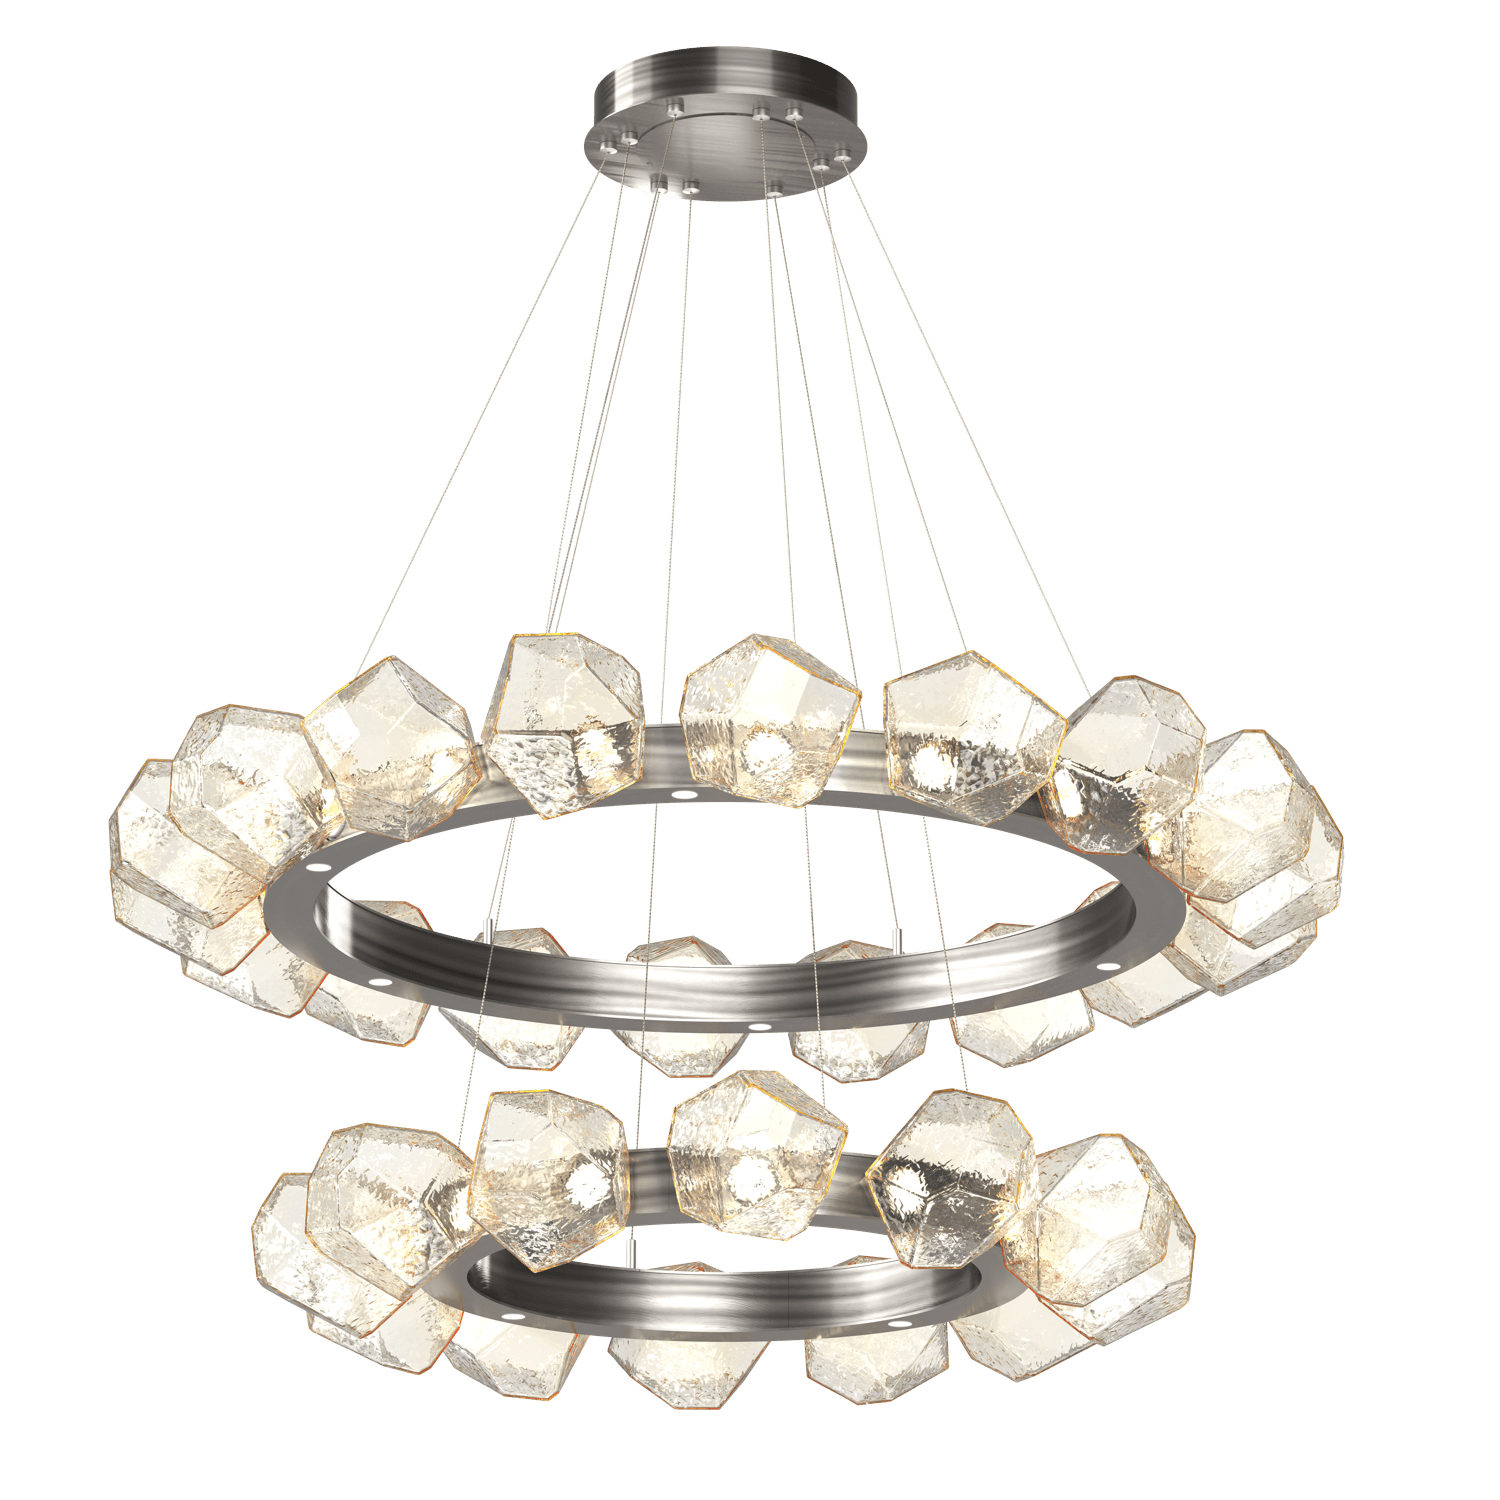 CHB0039-2T-GM-A-Hammerton-Studio-Gem-48-inch-two-tier-radial-ring-chandelier-with-gunmetal-finish-and-amber-blown-glass-shades-and-LED-lamping